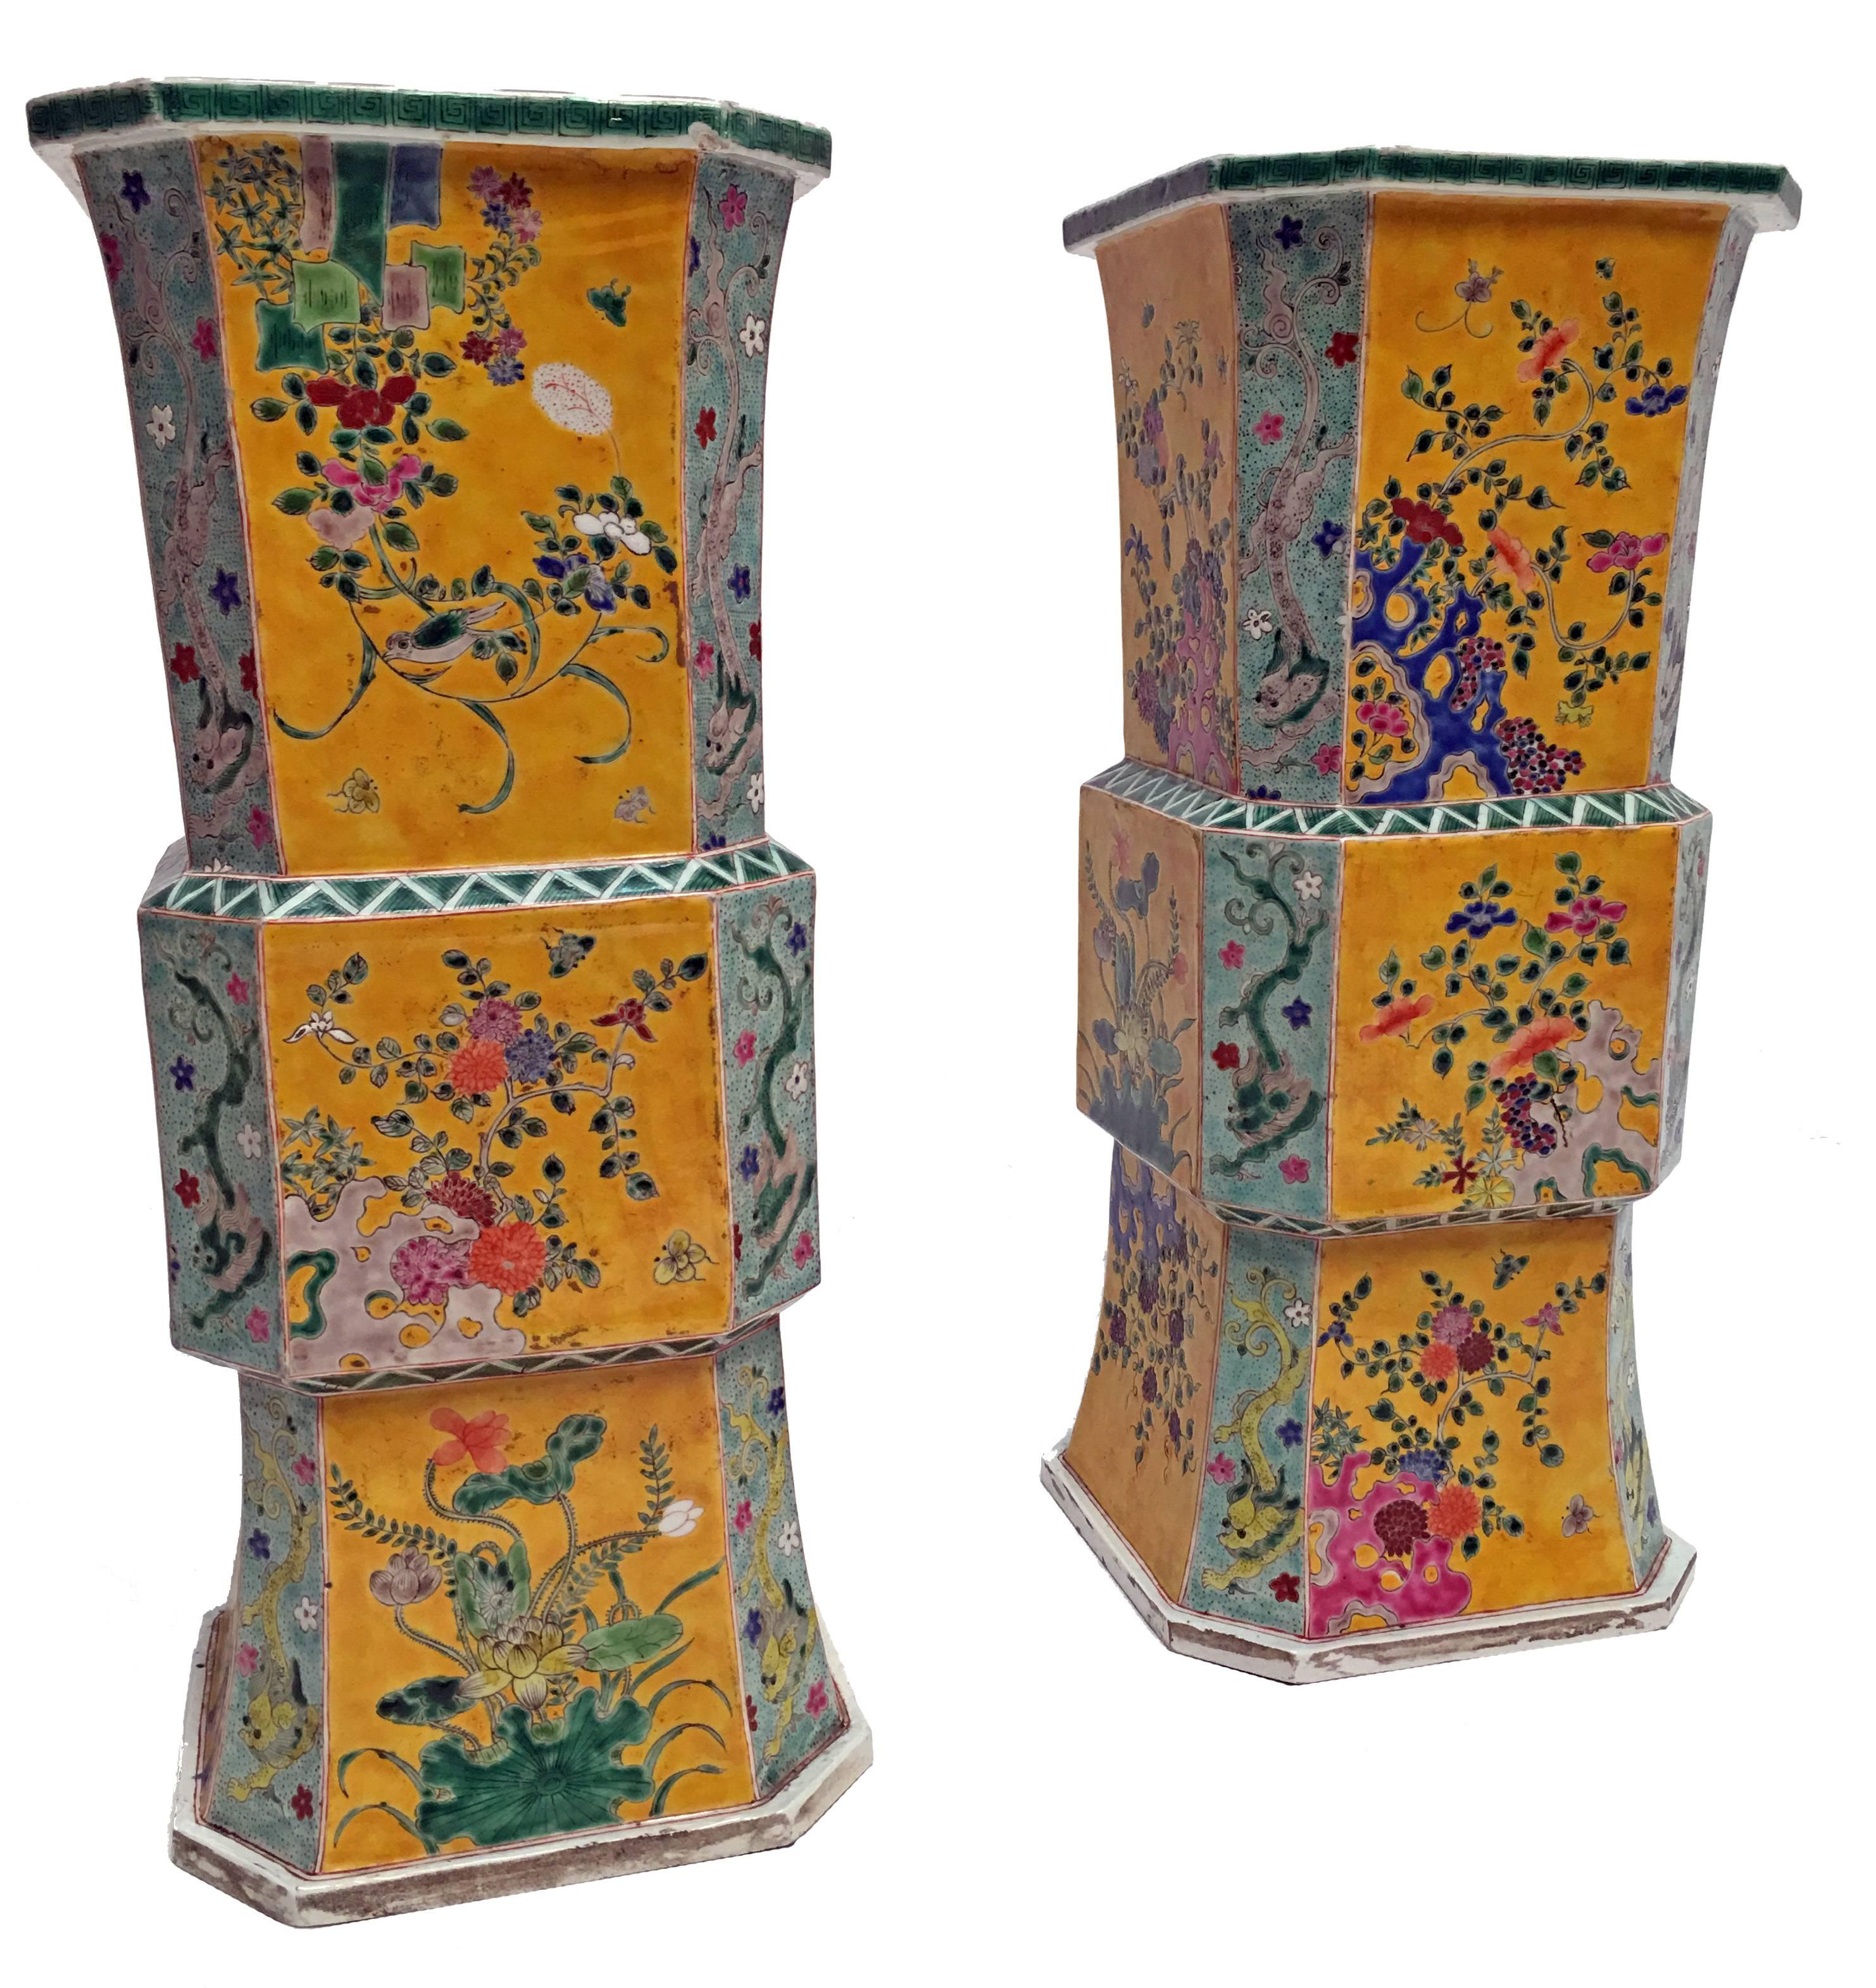 A large and extraordinary pair of Meiji period yellow porcelain vases with hand painted floral decoration. Wonderful color and presence, truly statement vases. Overall in remarkable antique condition, having some light very minor rubbing.
Japan,